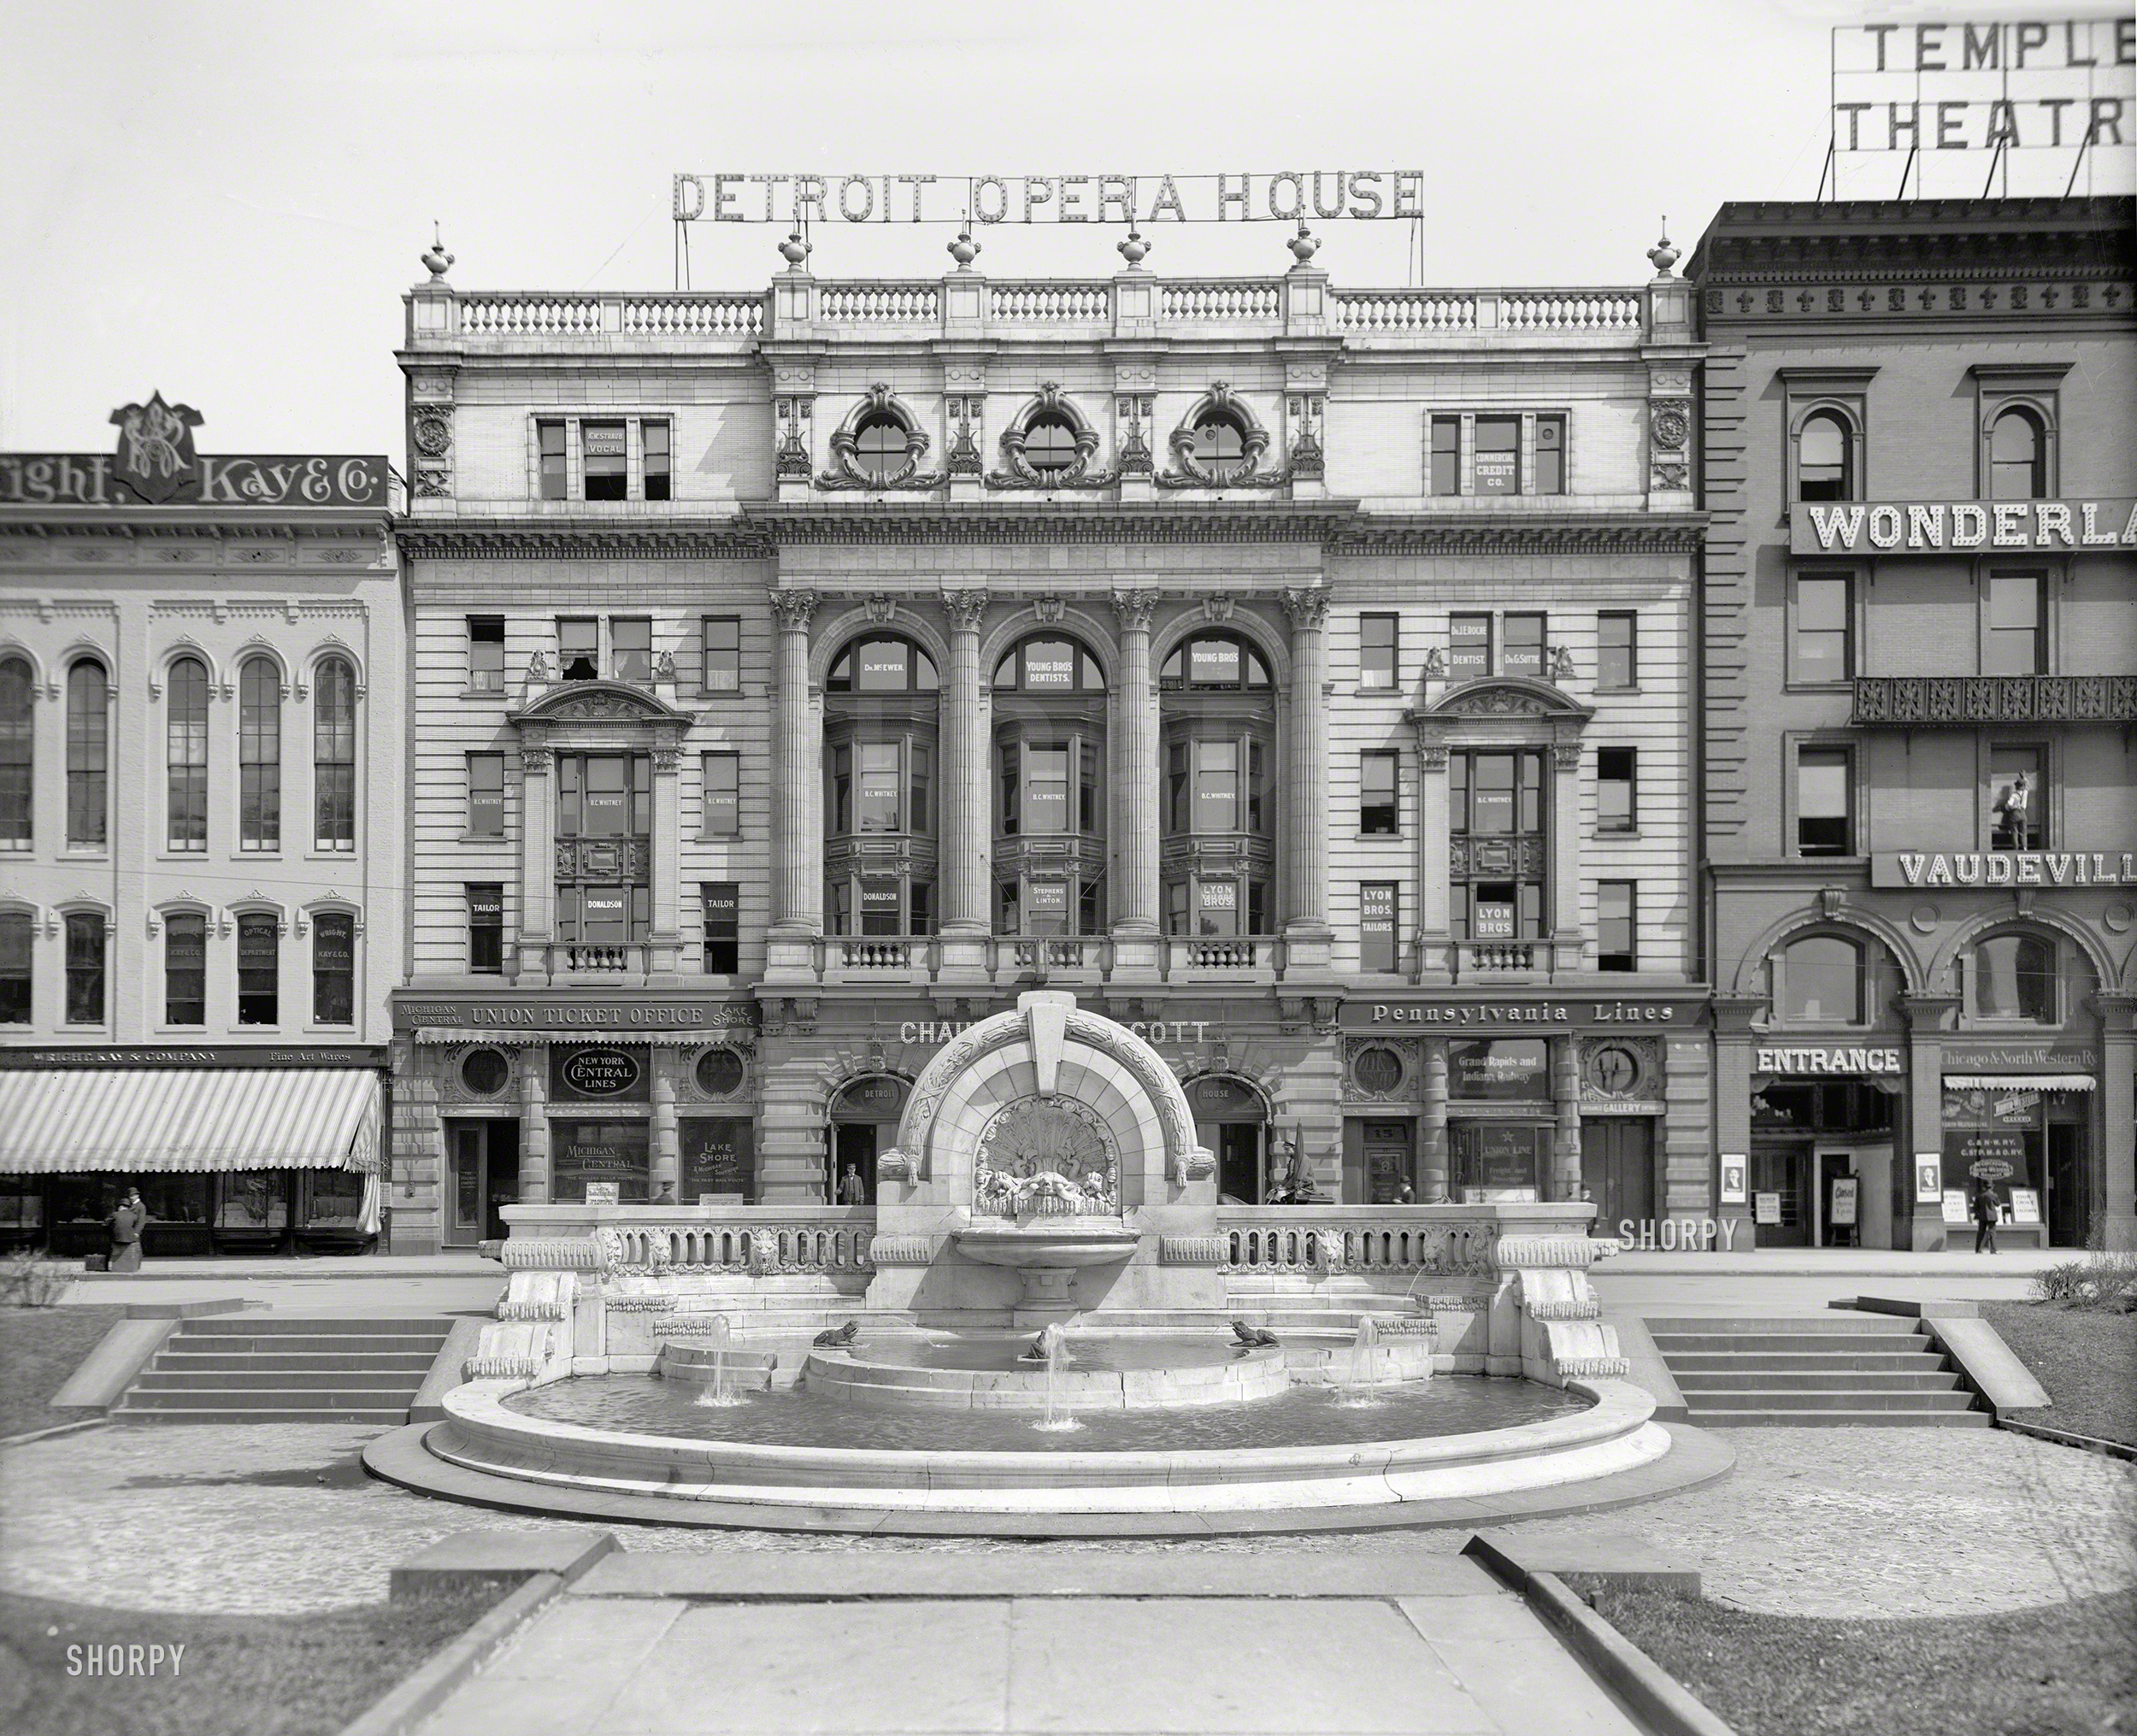 The Motor City circa 1905. "Detroit Opera House and Palmer Fountain." Also called the Merrill Fountain. 8x10 inch dry plate glass negative. View full size.